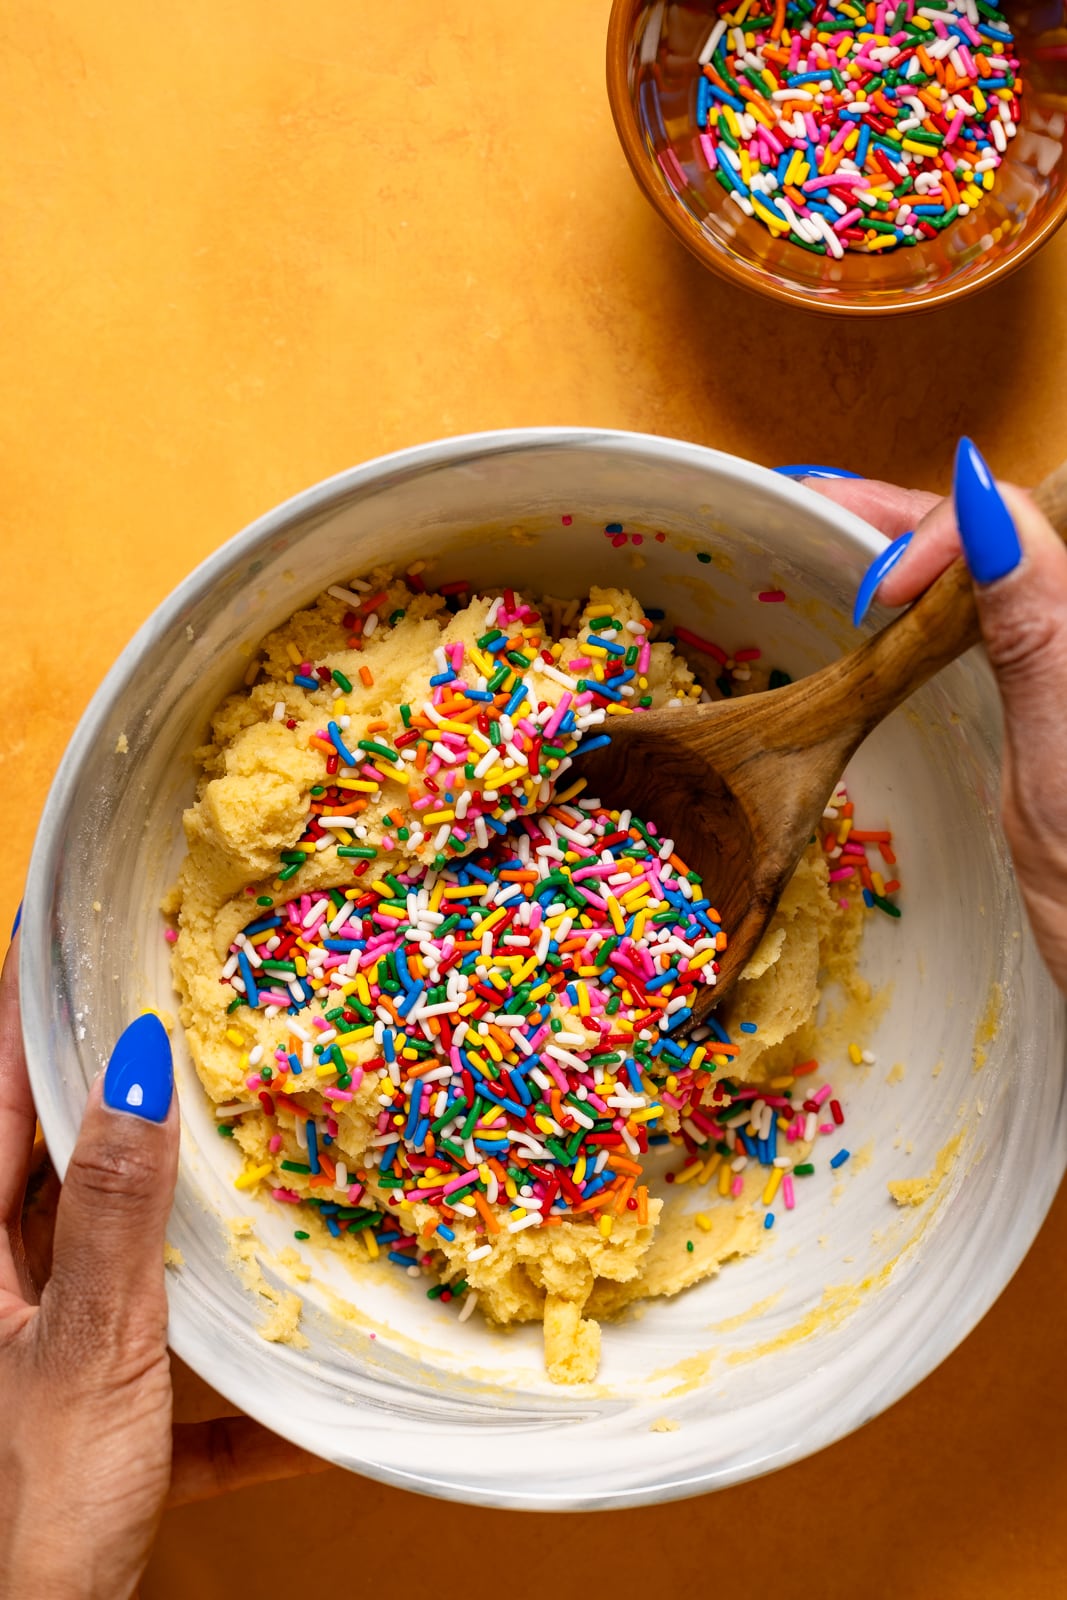 Cookie batter with sprinkles in a bowl with a wooden spoon.